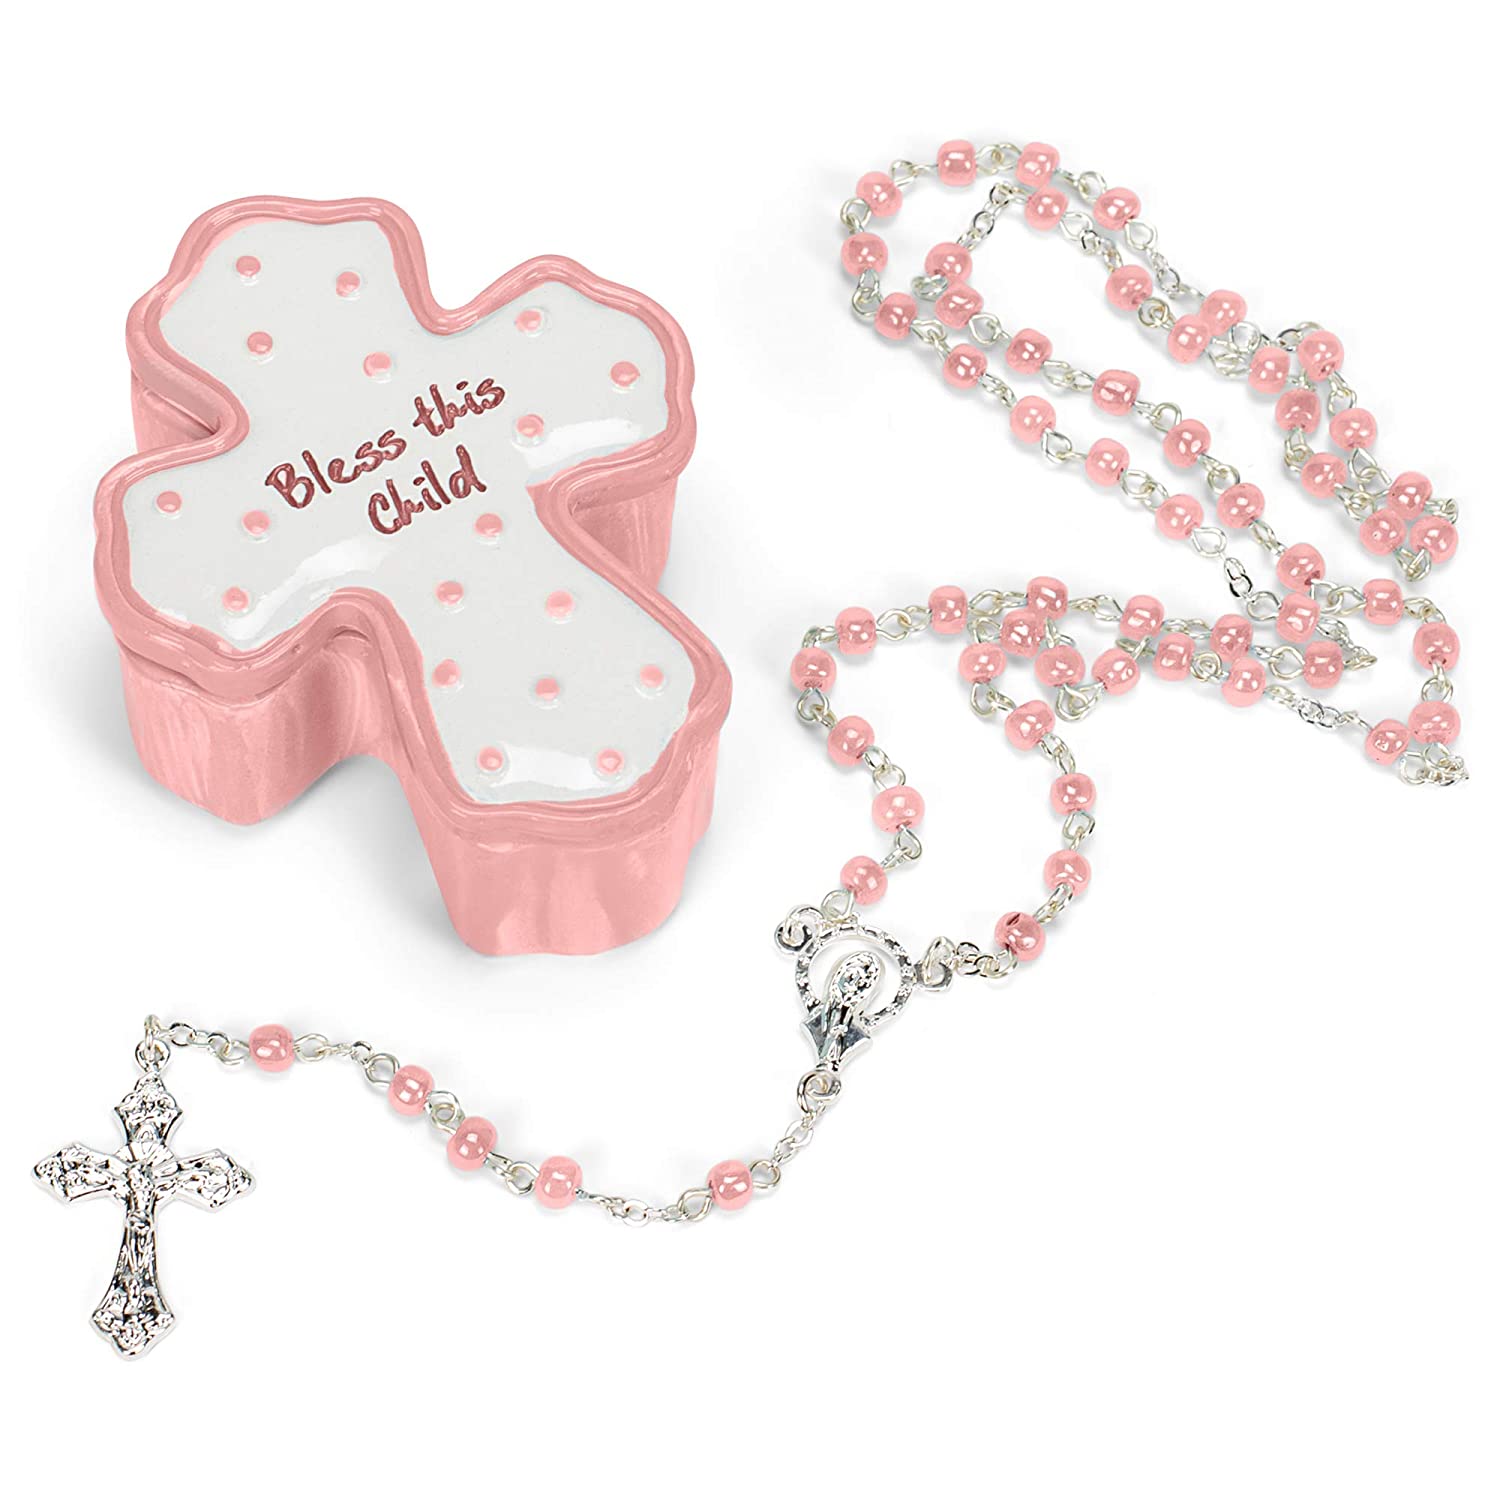 Bless This Child 1 inch Resin Decorative Keepsake Box and Rosary